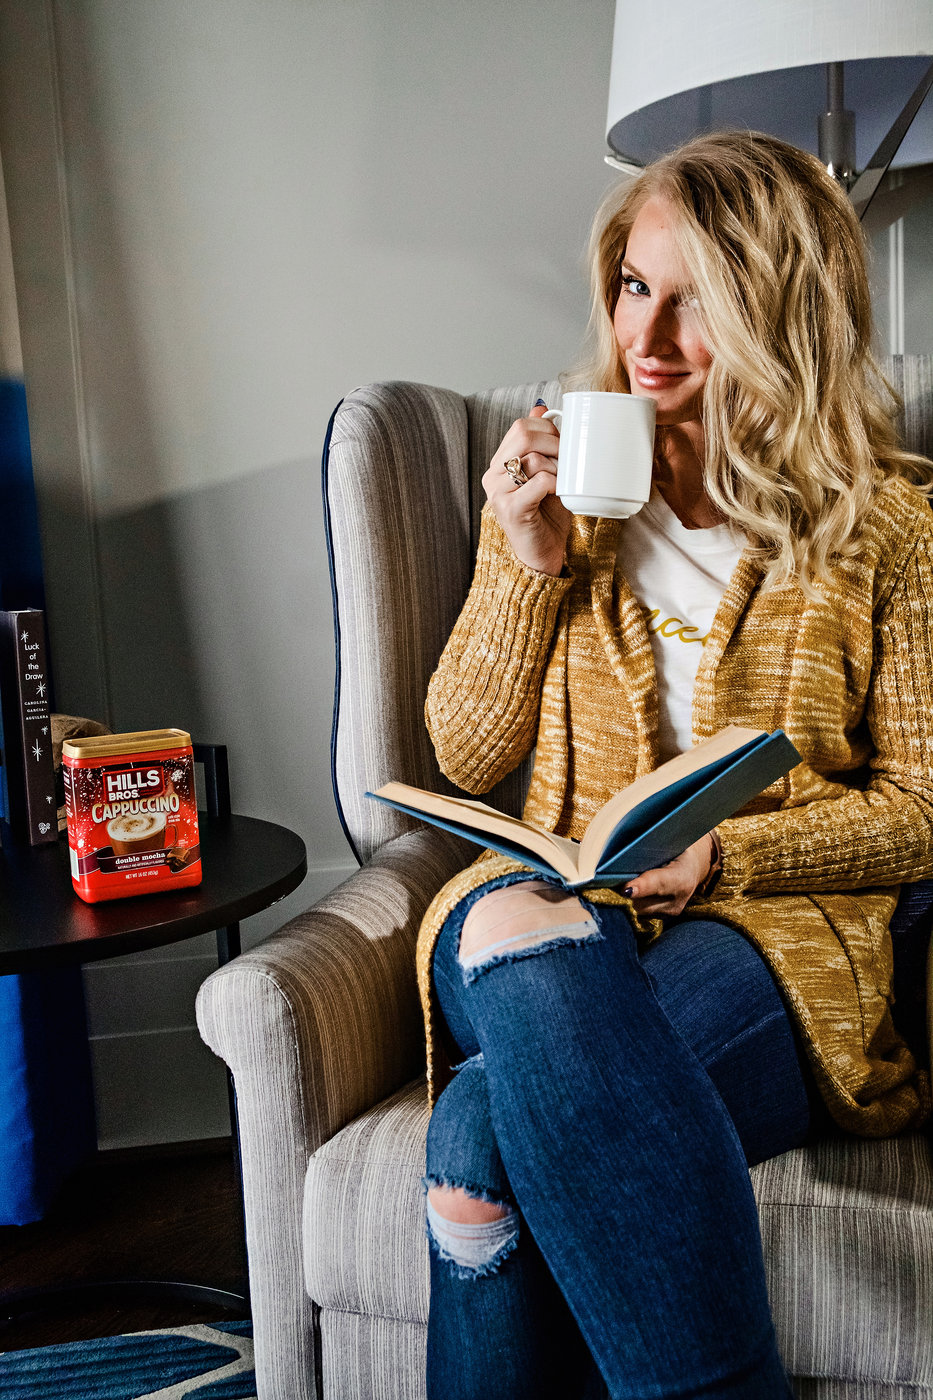 Looking for a great book to read this month? Popular Atlanta Blogger is sharing her top picks with the November Book Club! Click to see it and join in this month's book picks!